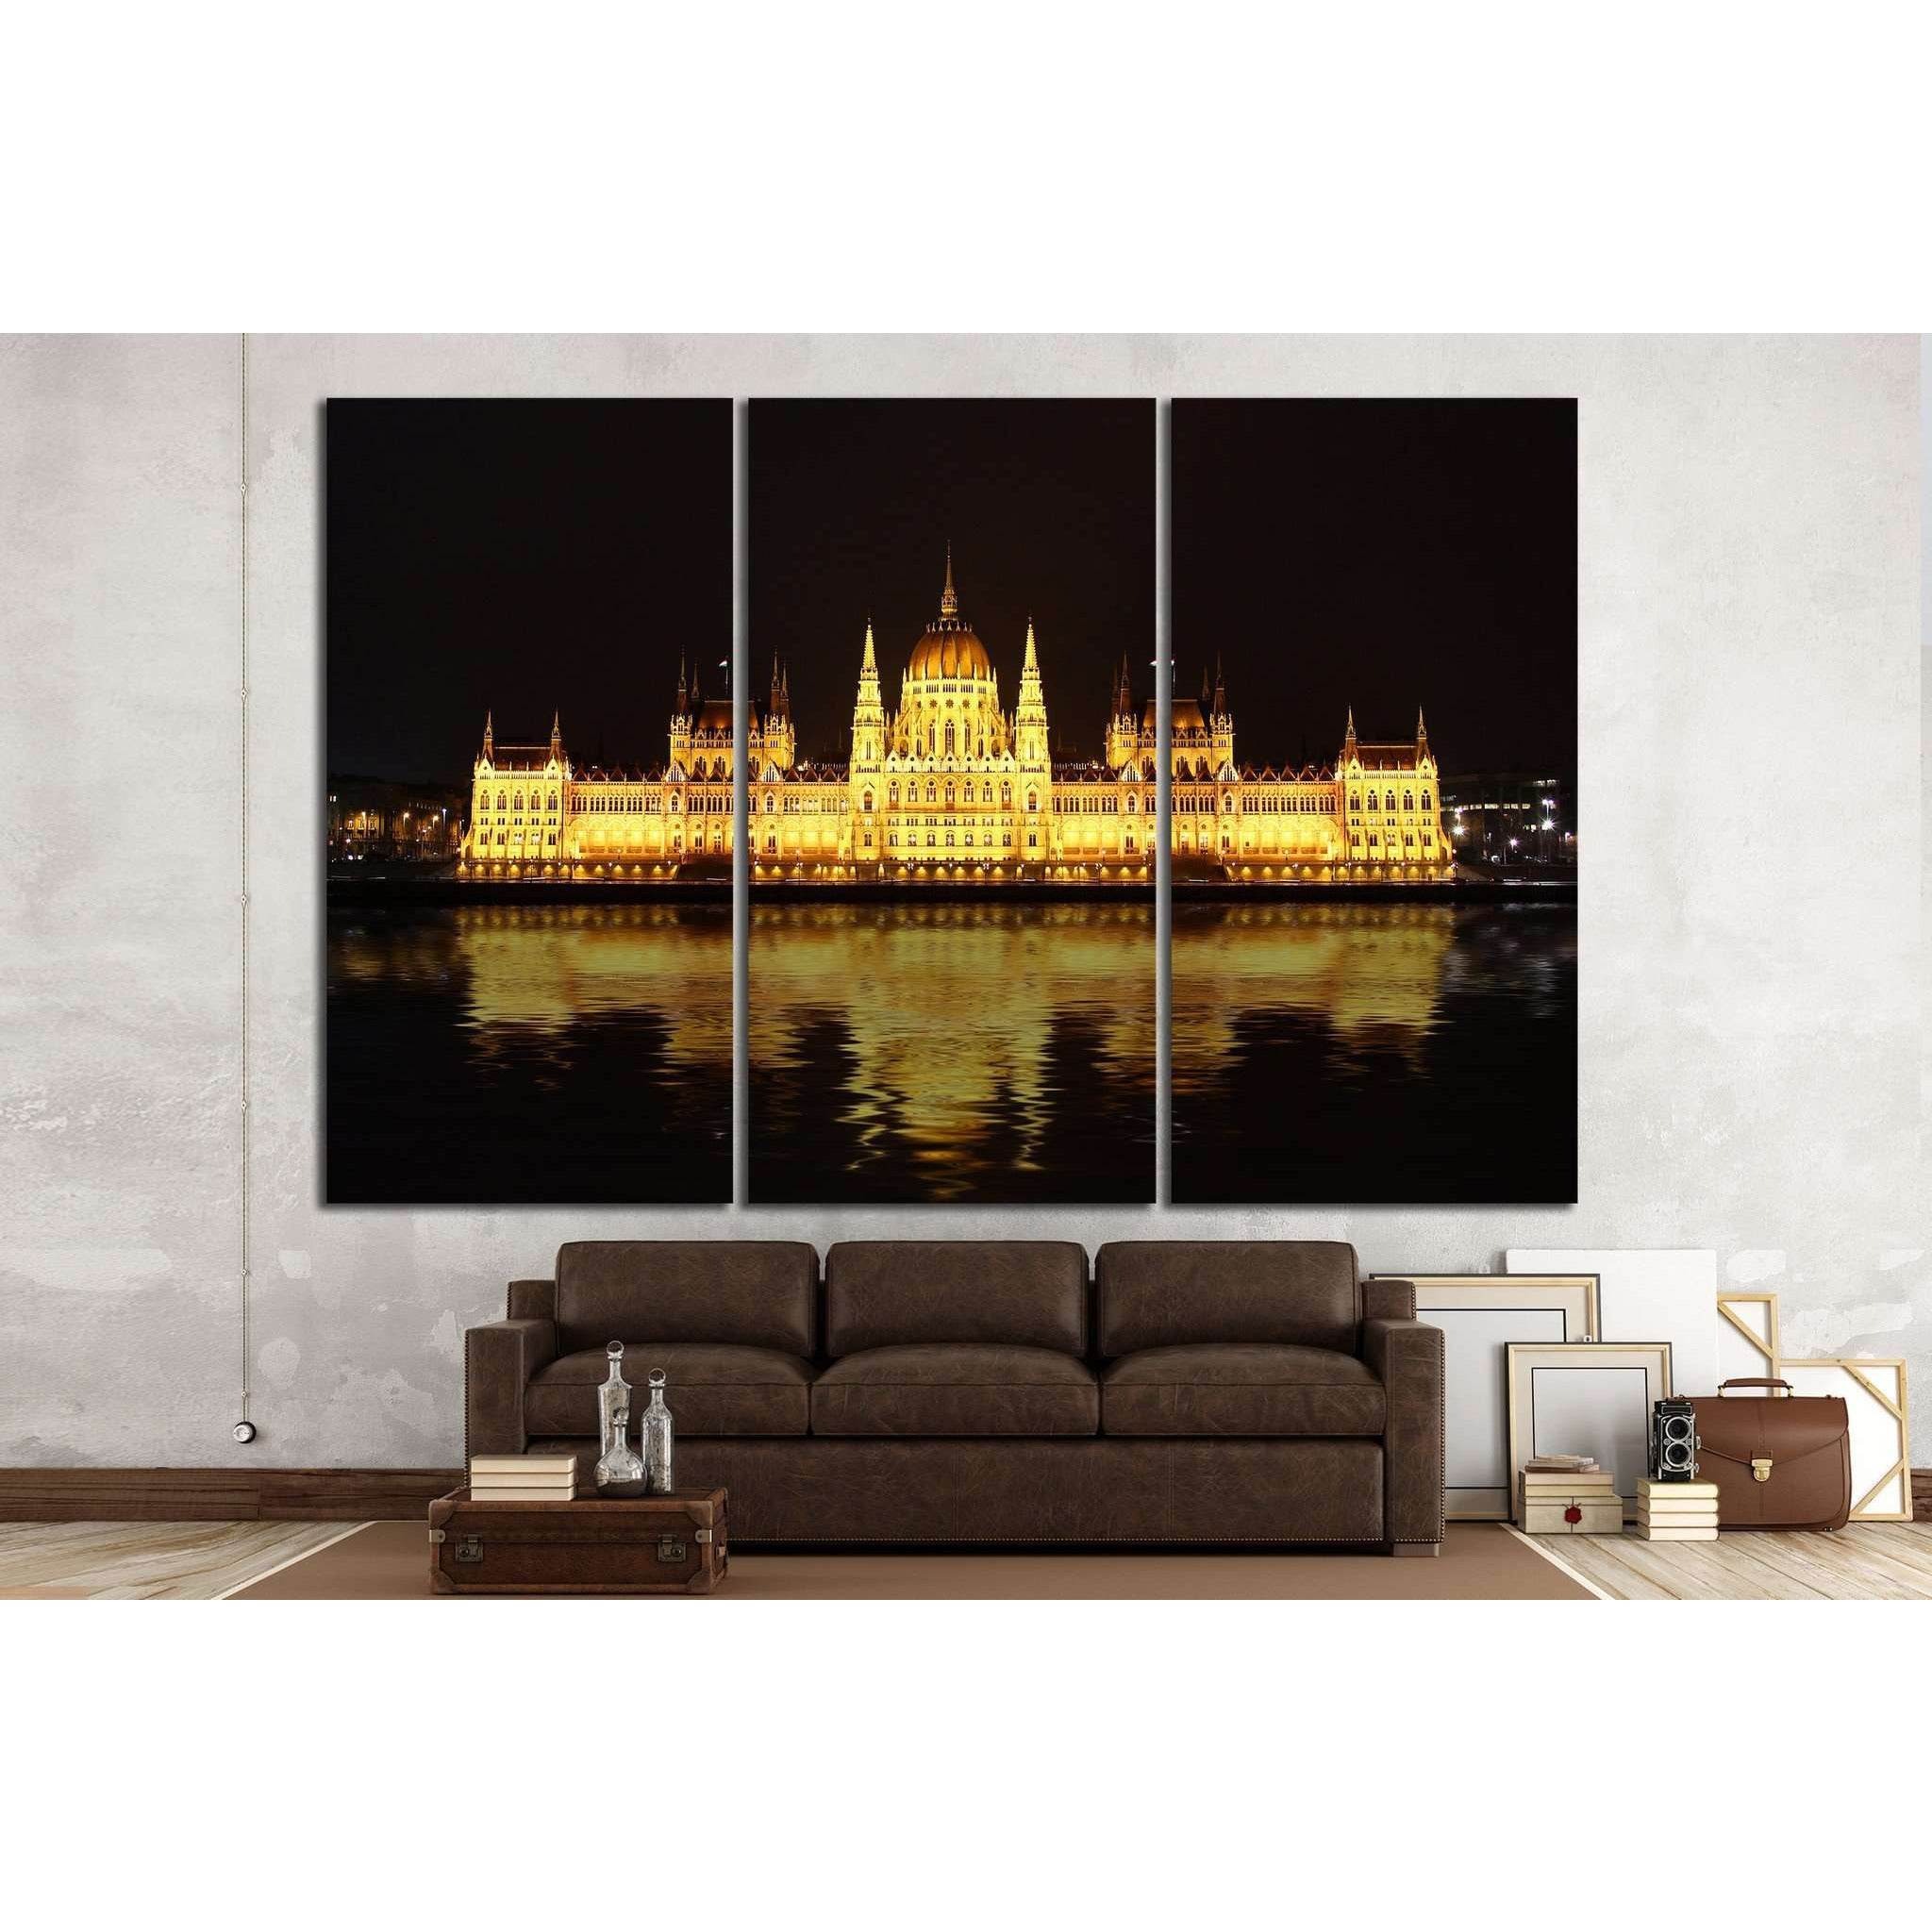 Hungarian Parliament Building №521 Ready to Hang Canvas Print